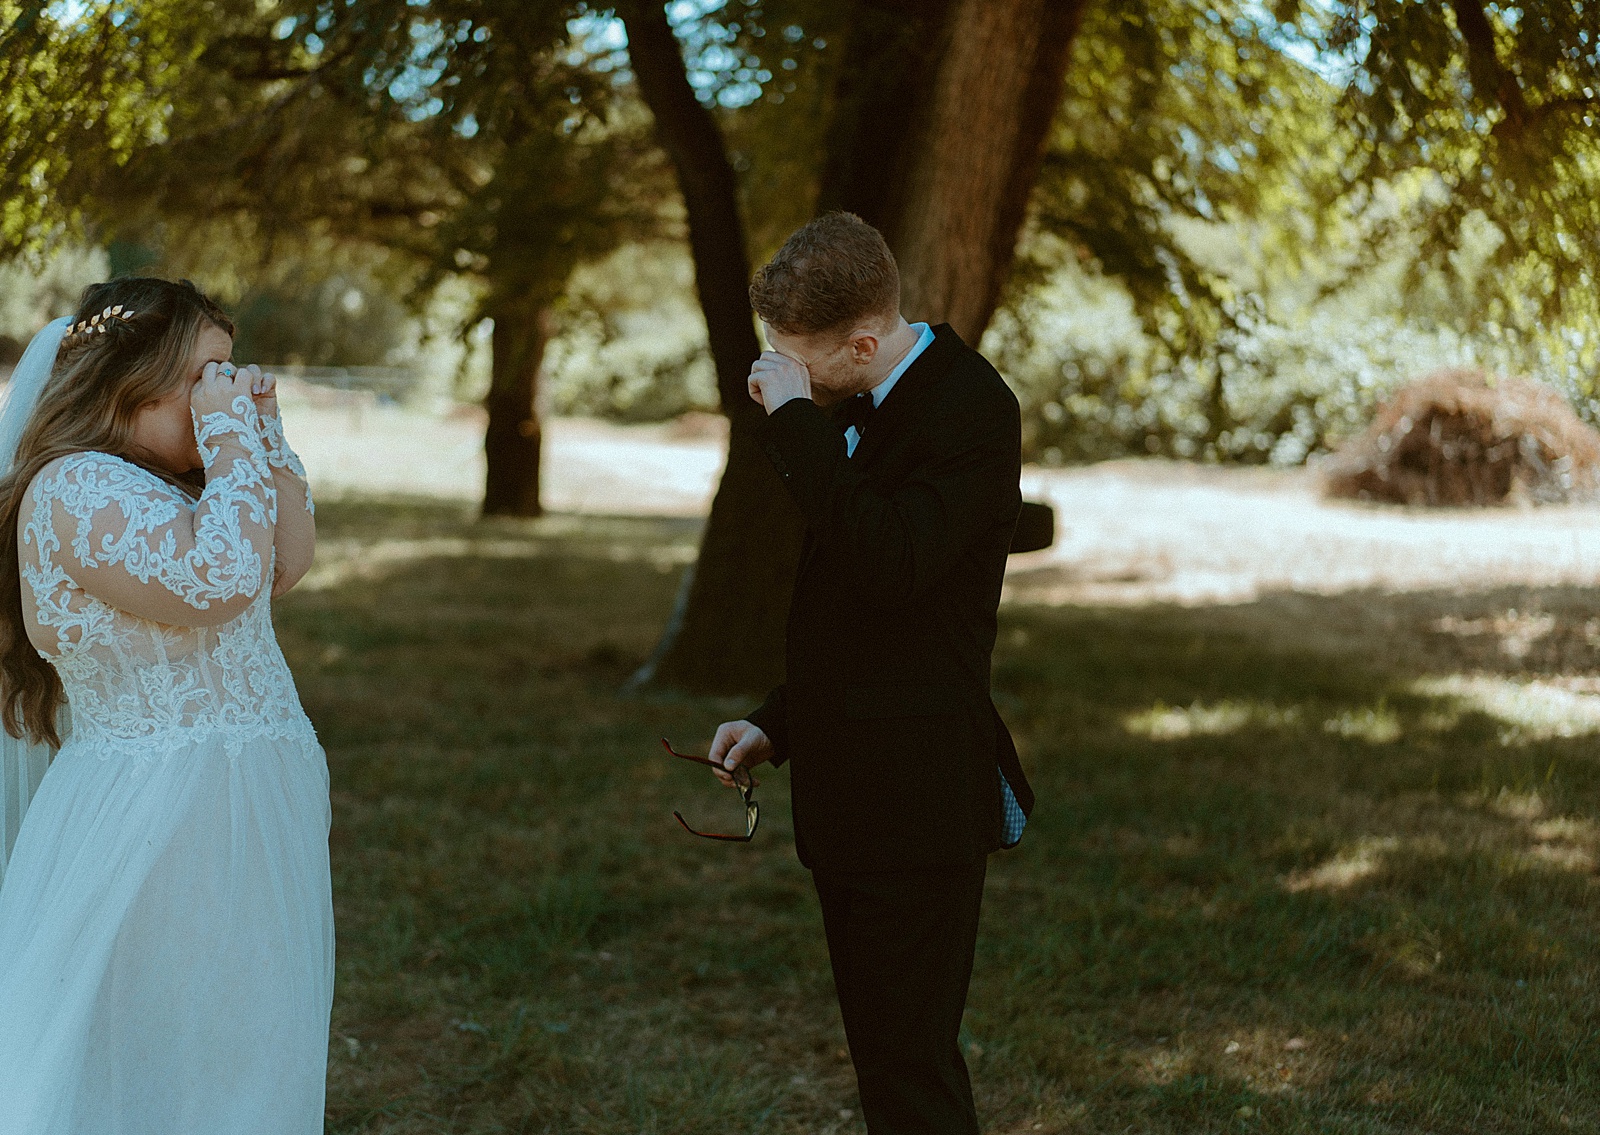 Bride and groom first look under trees by Danielle Johnson Photography